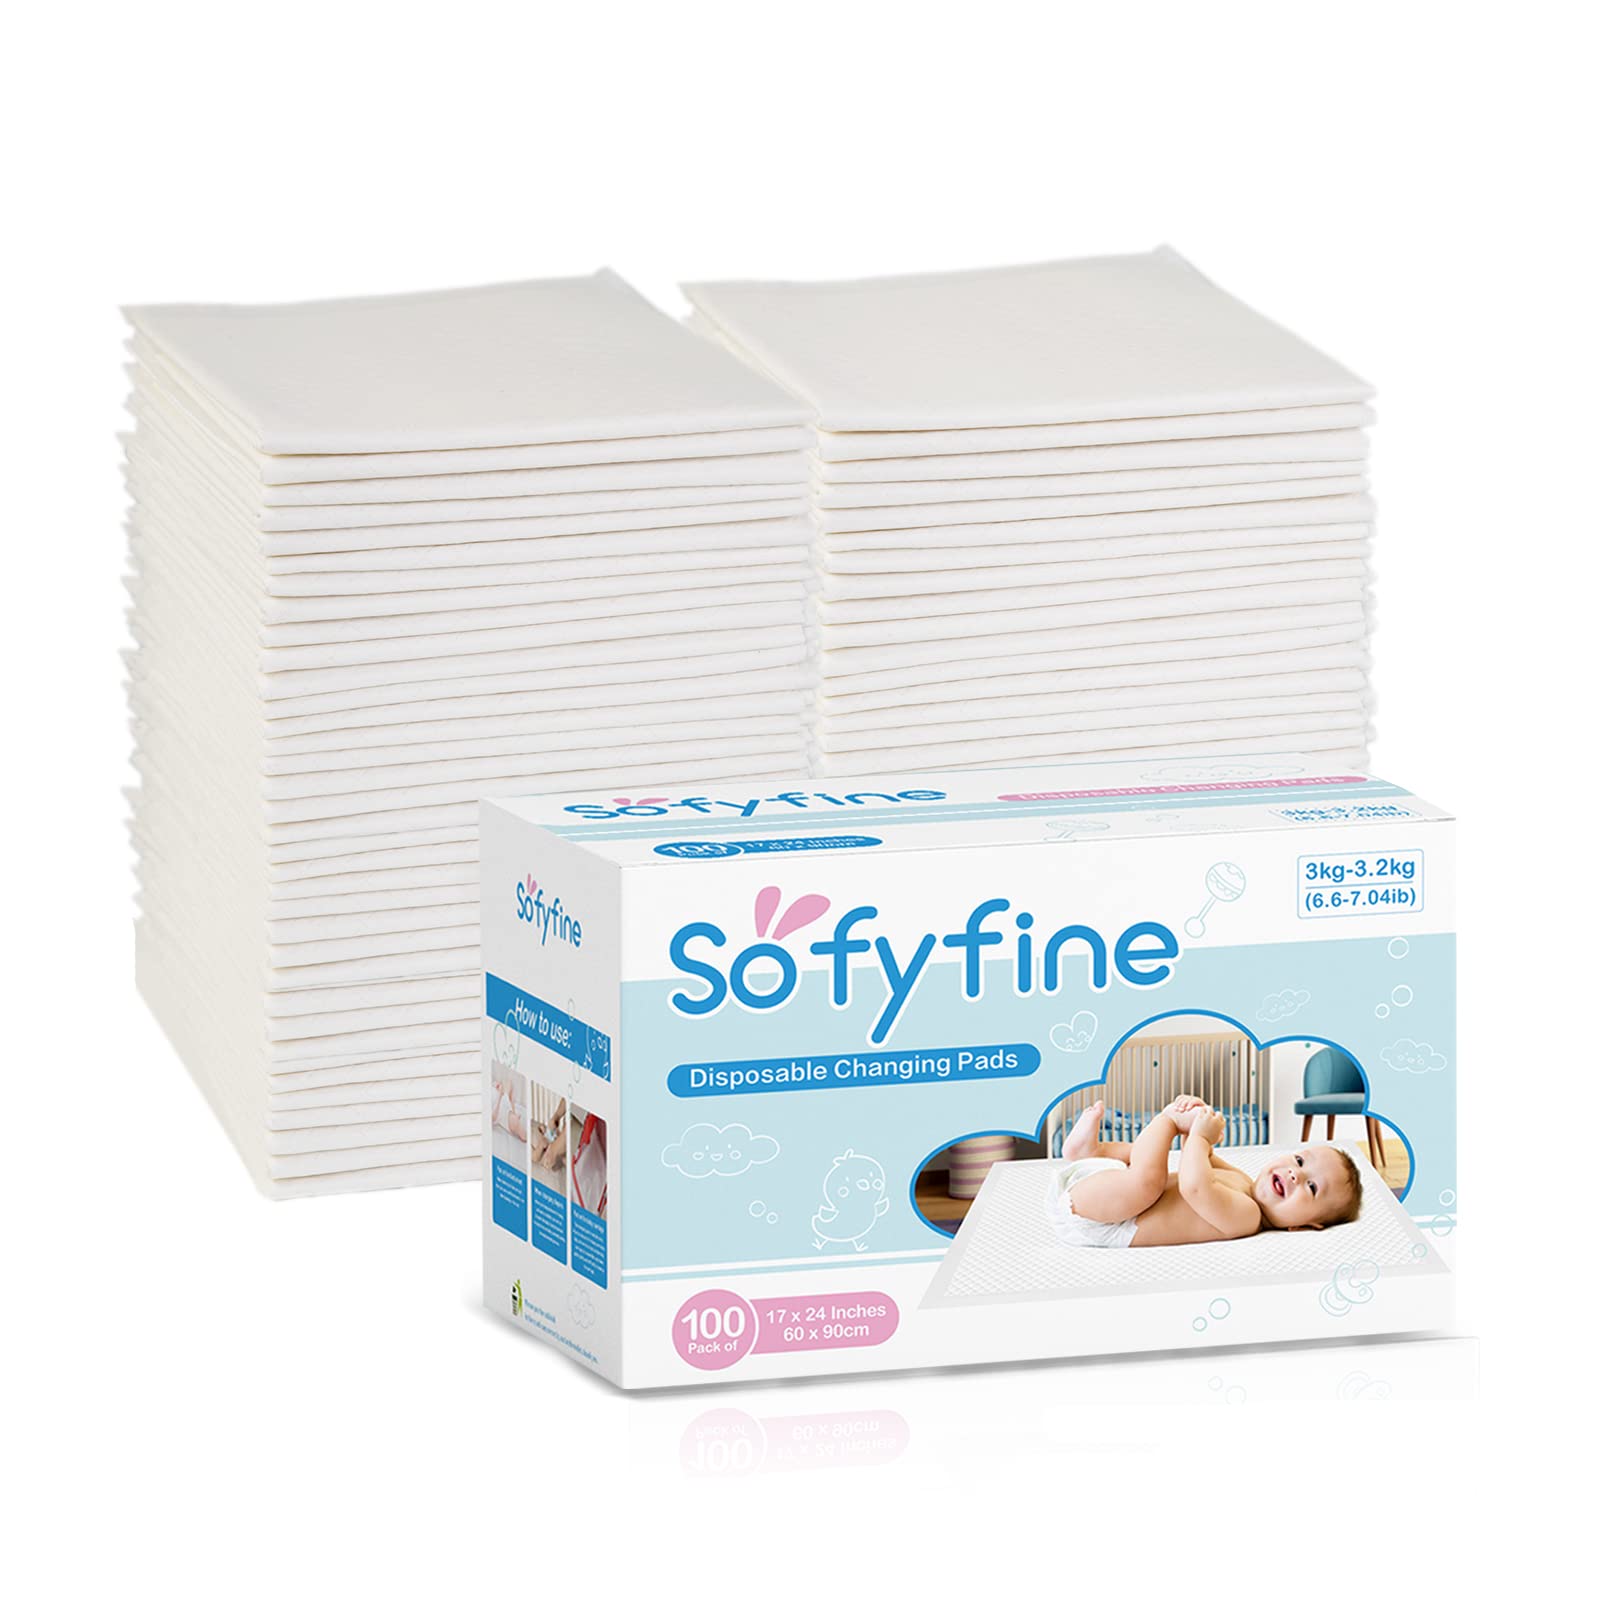 SOFYFINE (100 Count) Disposable Changing Pads for Baby, Waterproof Bed Pads,  Underpads for Changing Table, Newborn Diaper Pad Liners, Toddler Pee Pad,  24 x 17 Inches, White 100 Count (Pack of 1)